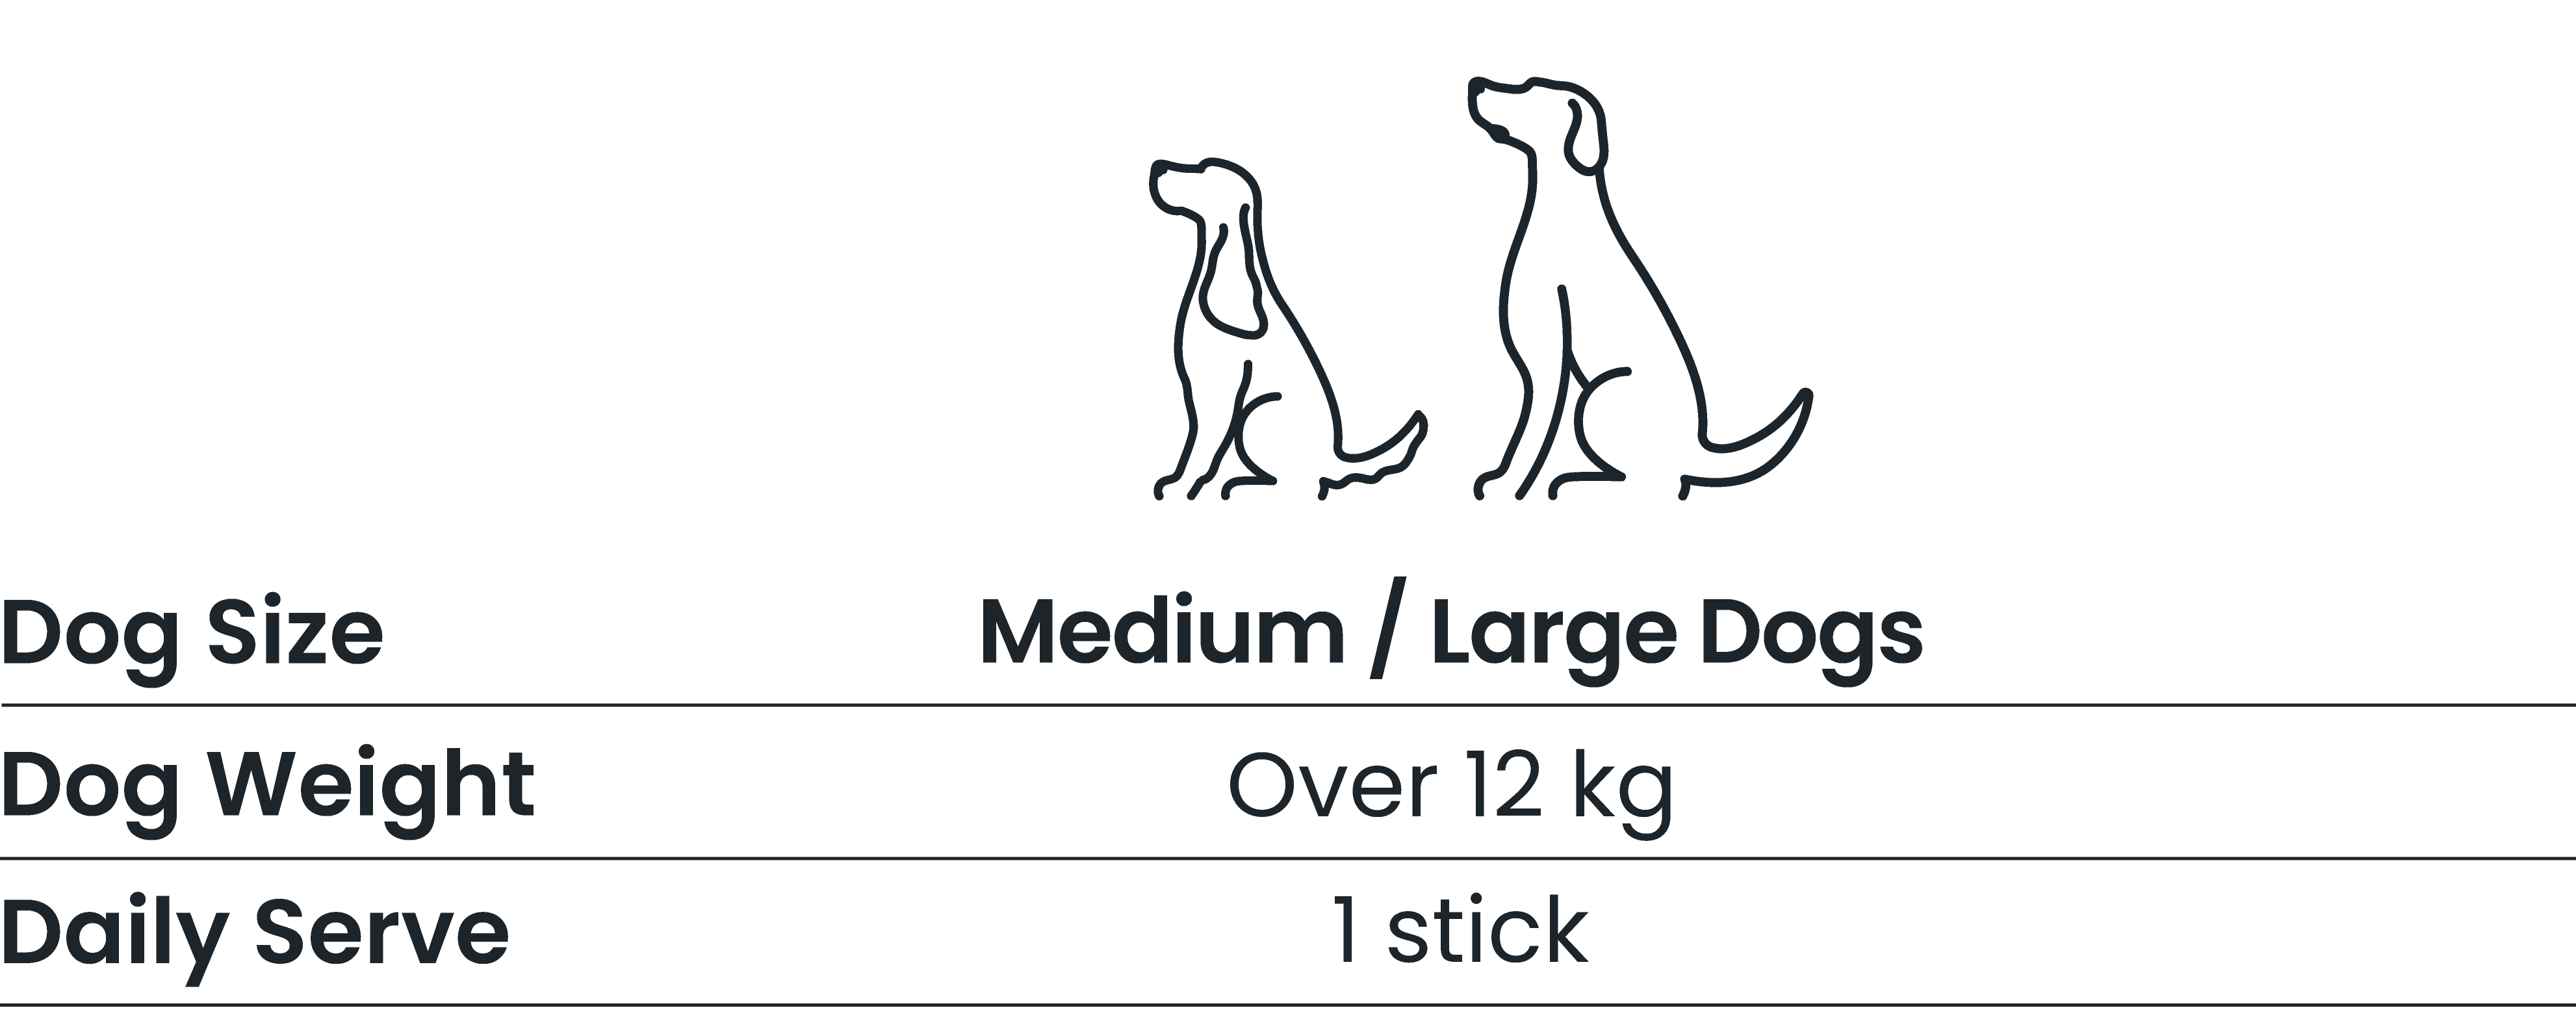 For medium/large dogs over 12 kg, feed one stick per day.